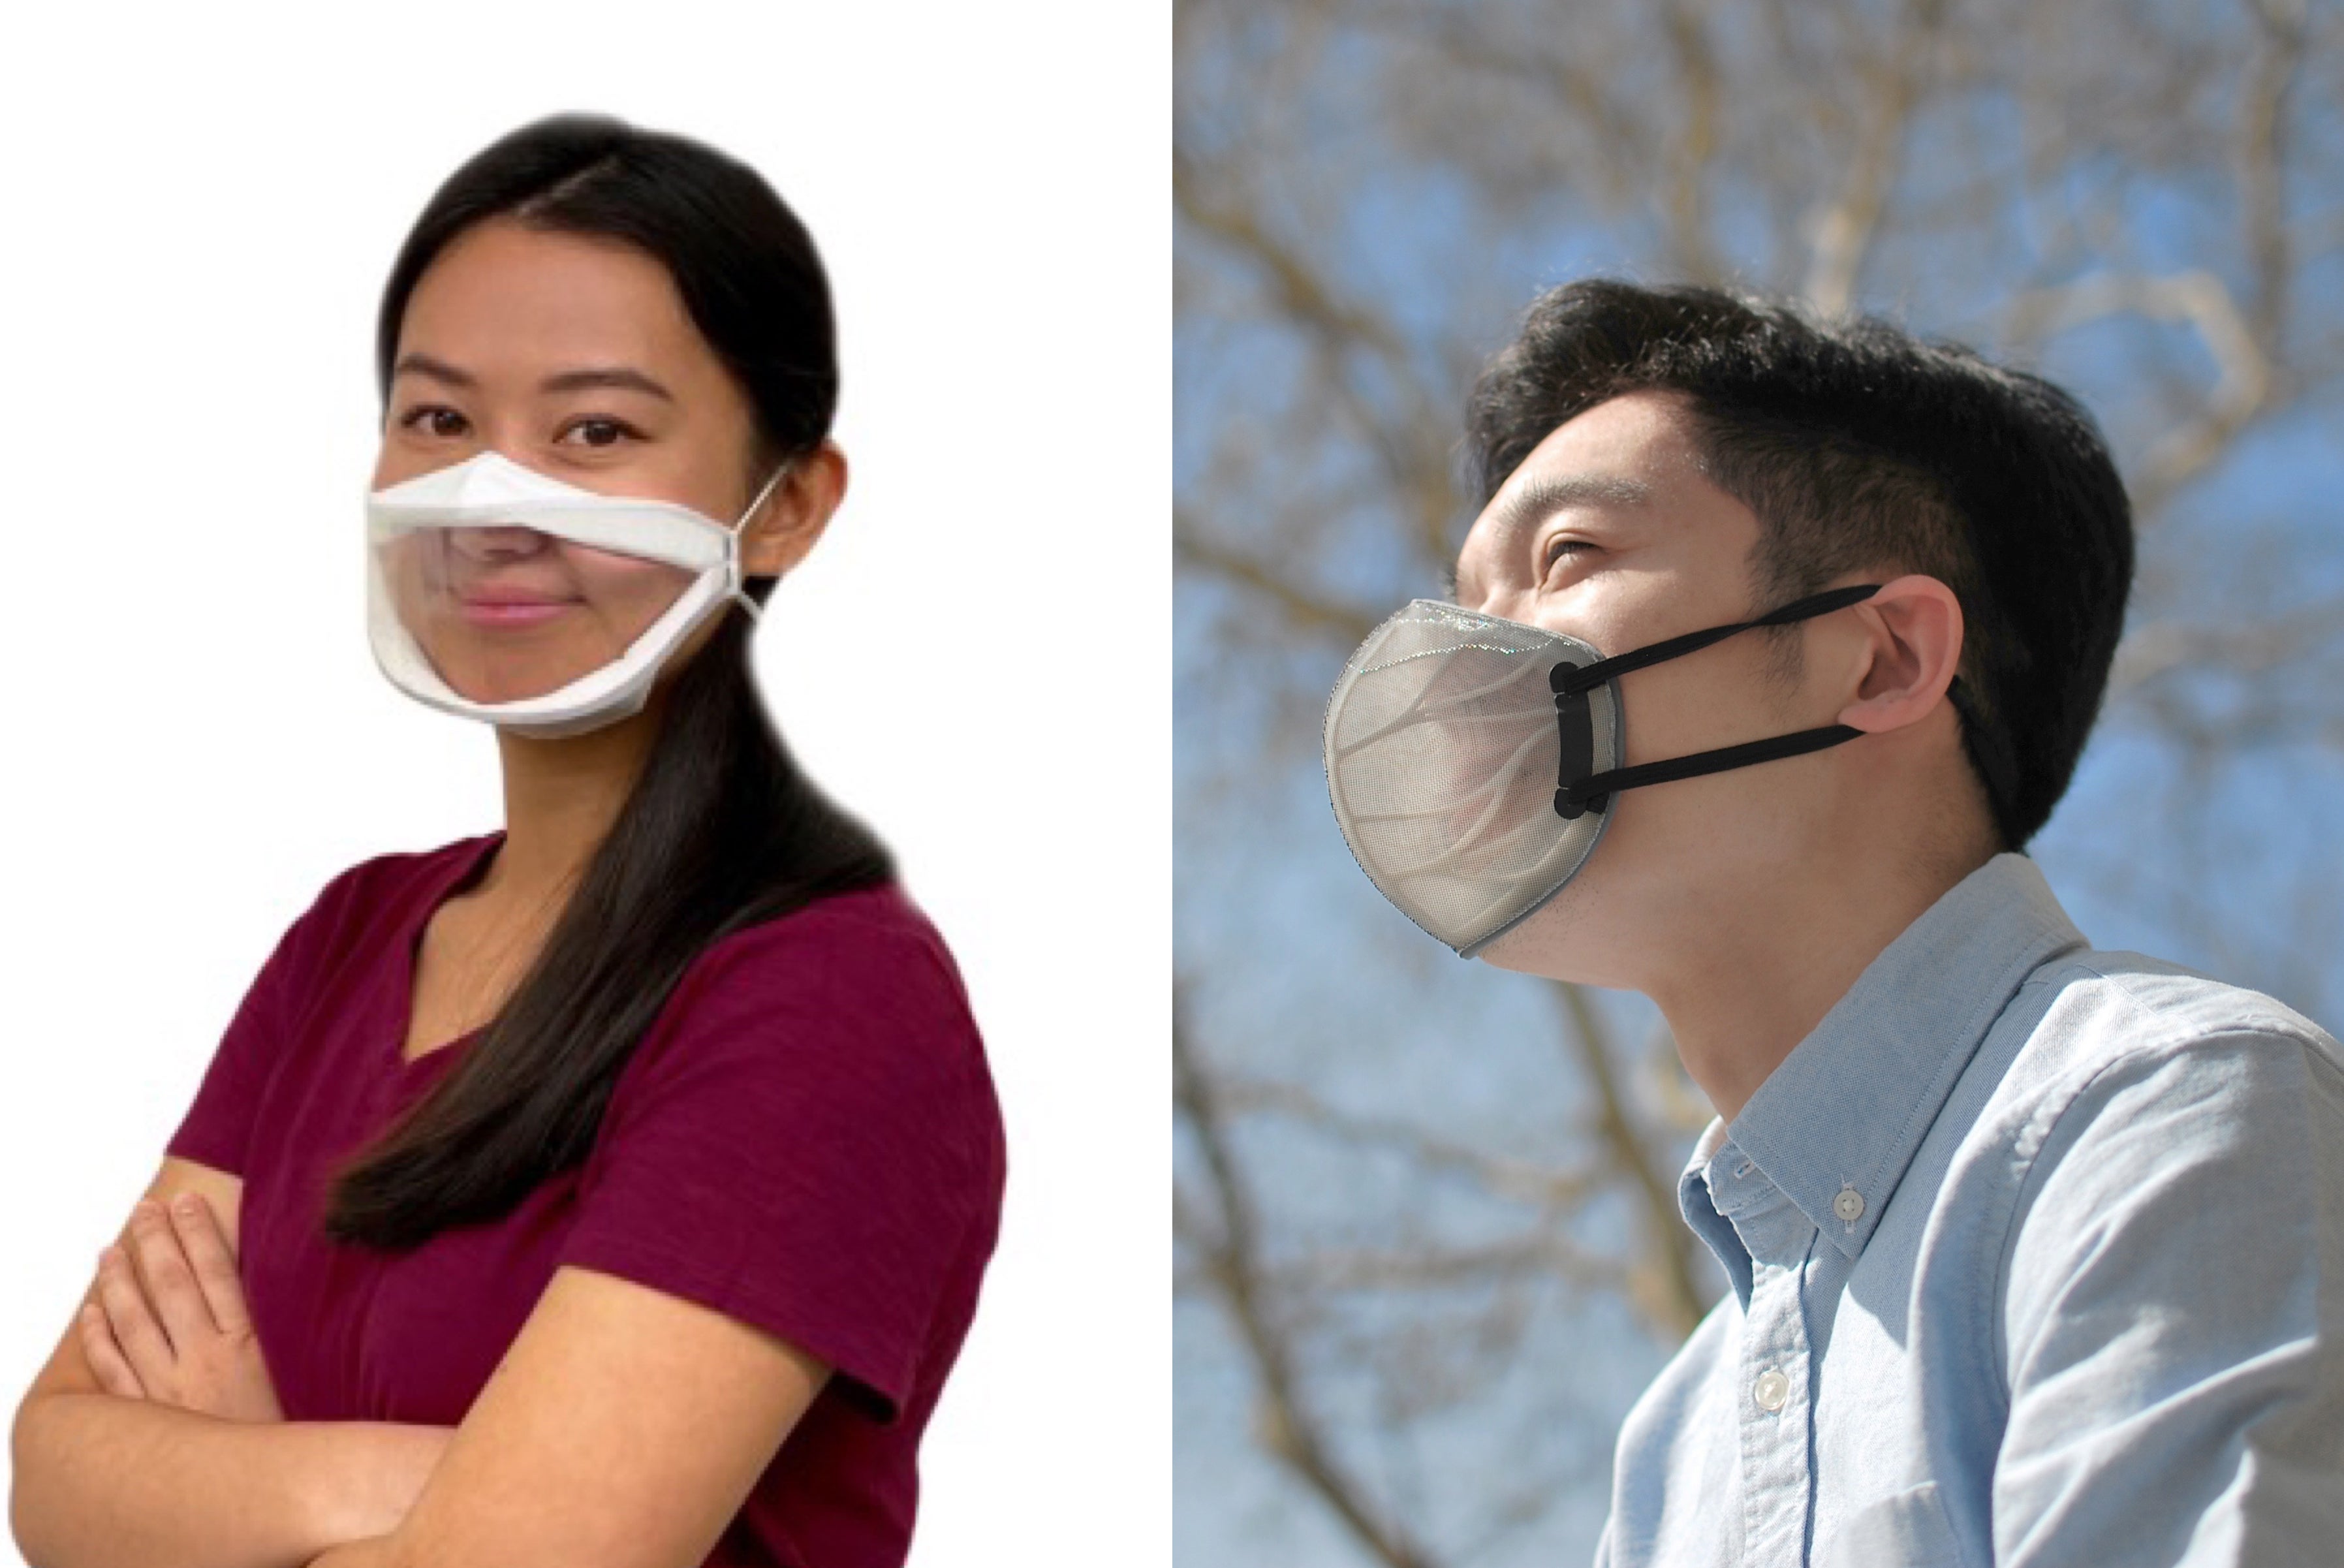 Several finalists, including ClearMask (left) and BreSafe (right) have created transparent or semi-transparent face coverings that make facial expressions easier to read without sacrificing filtration.